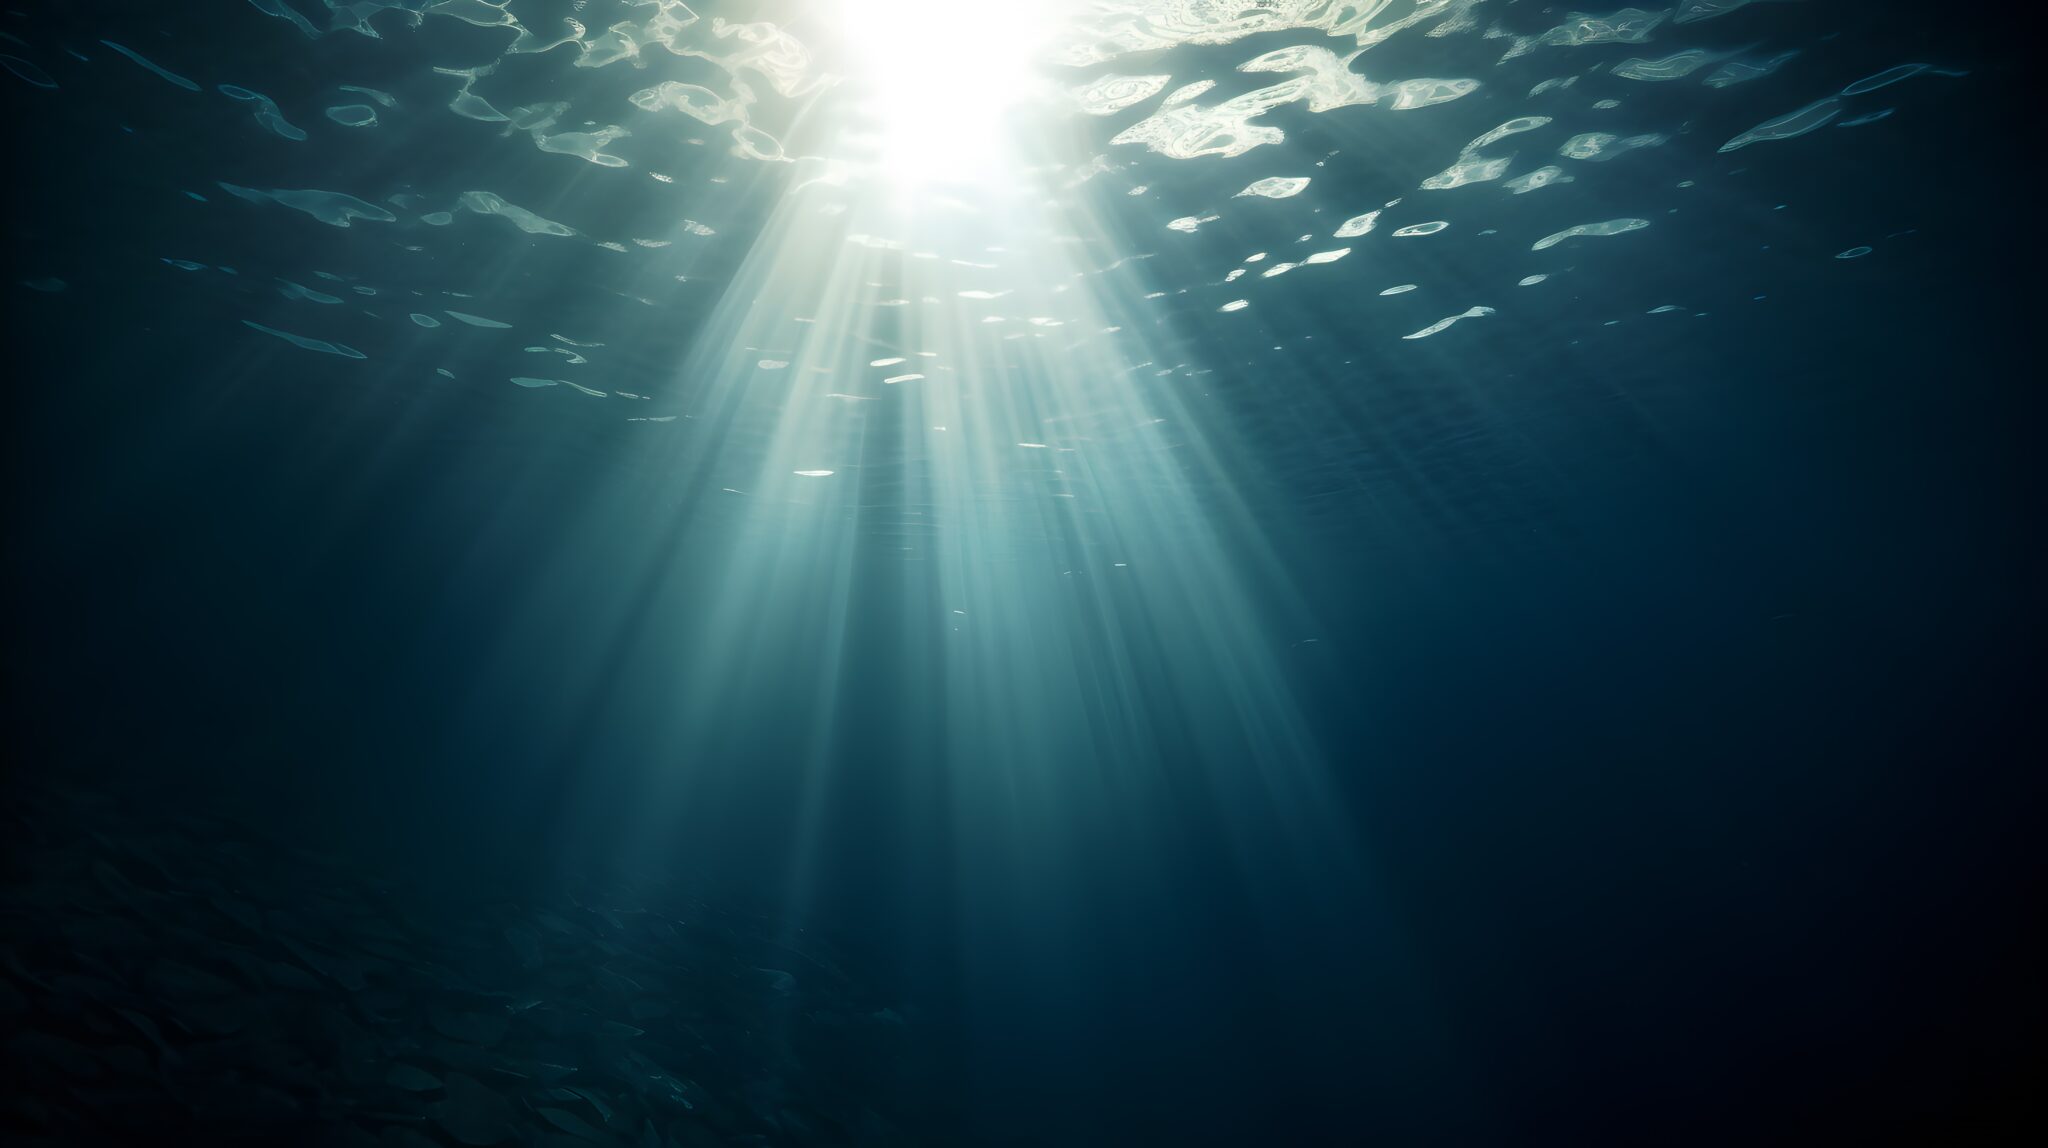 rays of light as seen from underwater in the ocean or sea